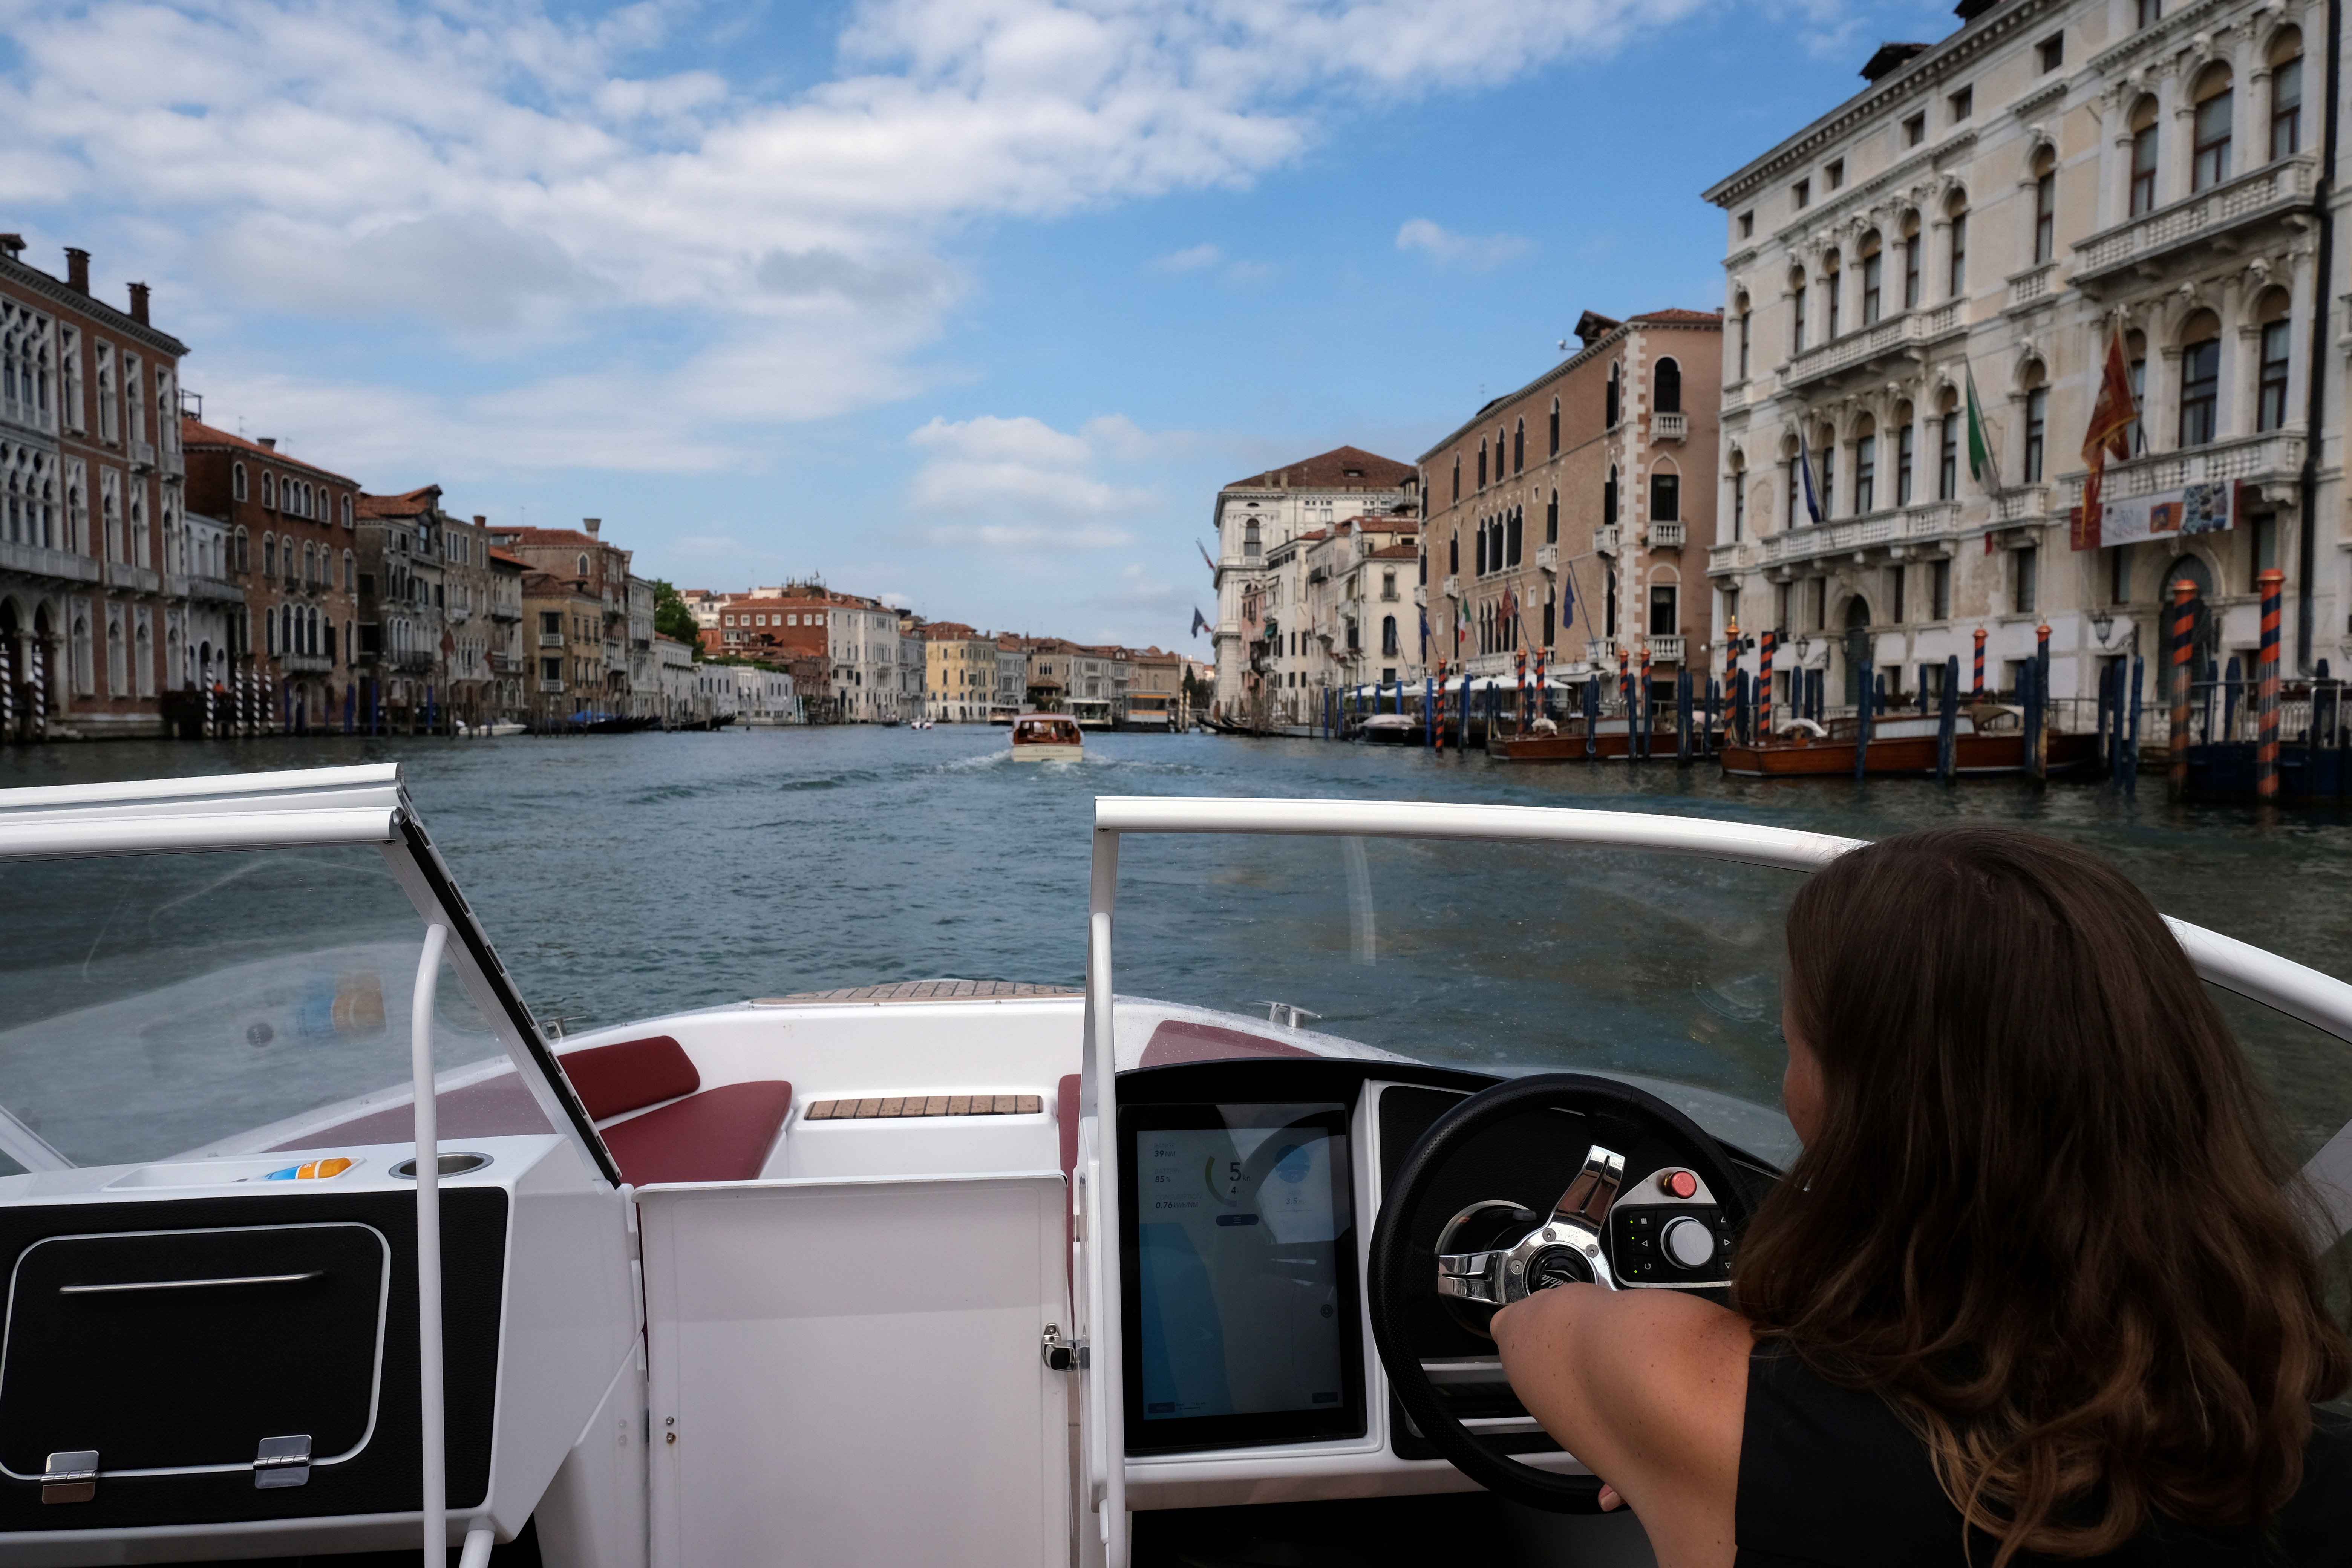 A new Swedish-designed electric boat is tested during the Salone Nautico in the lagoon city of Venice